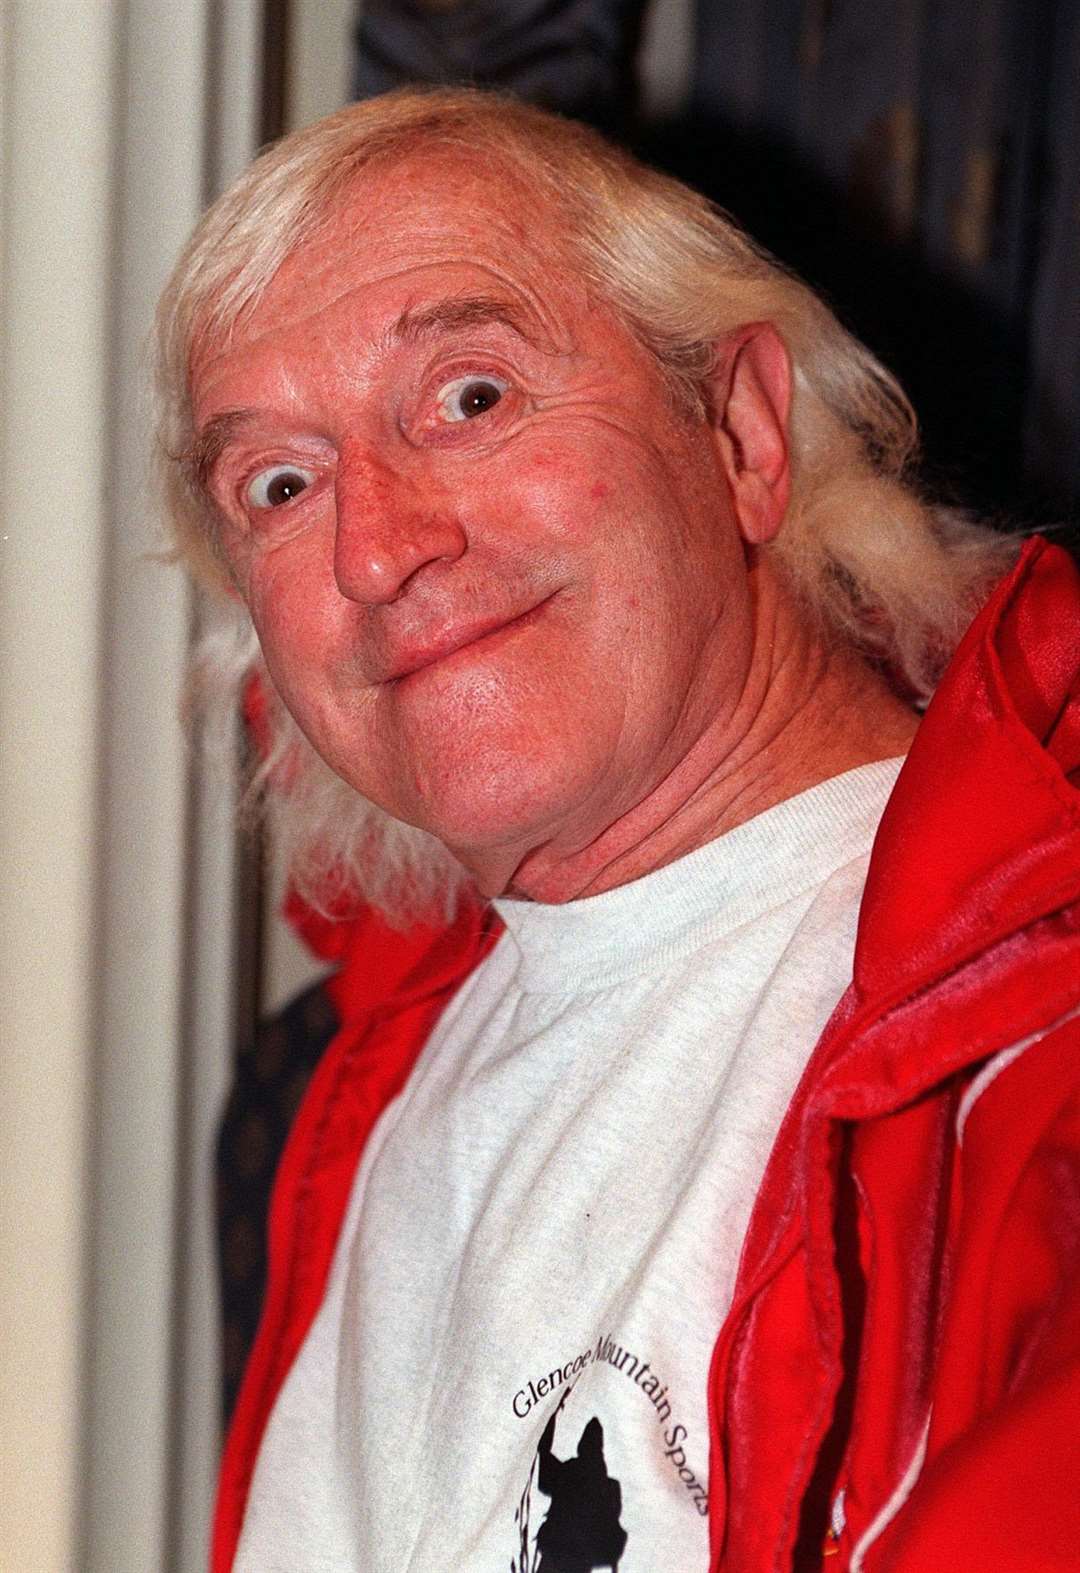 The full extent of Jimmy Savile’s crimes was revealed in Operation Yewtree’s report in 2013 (PA)